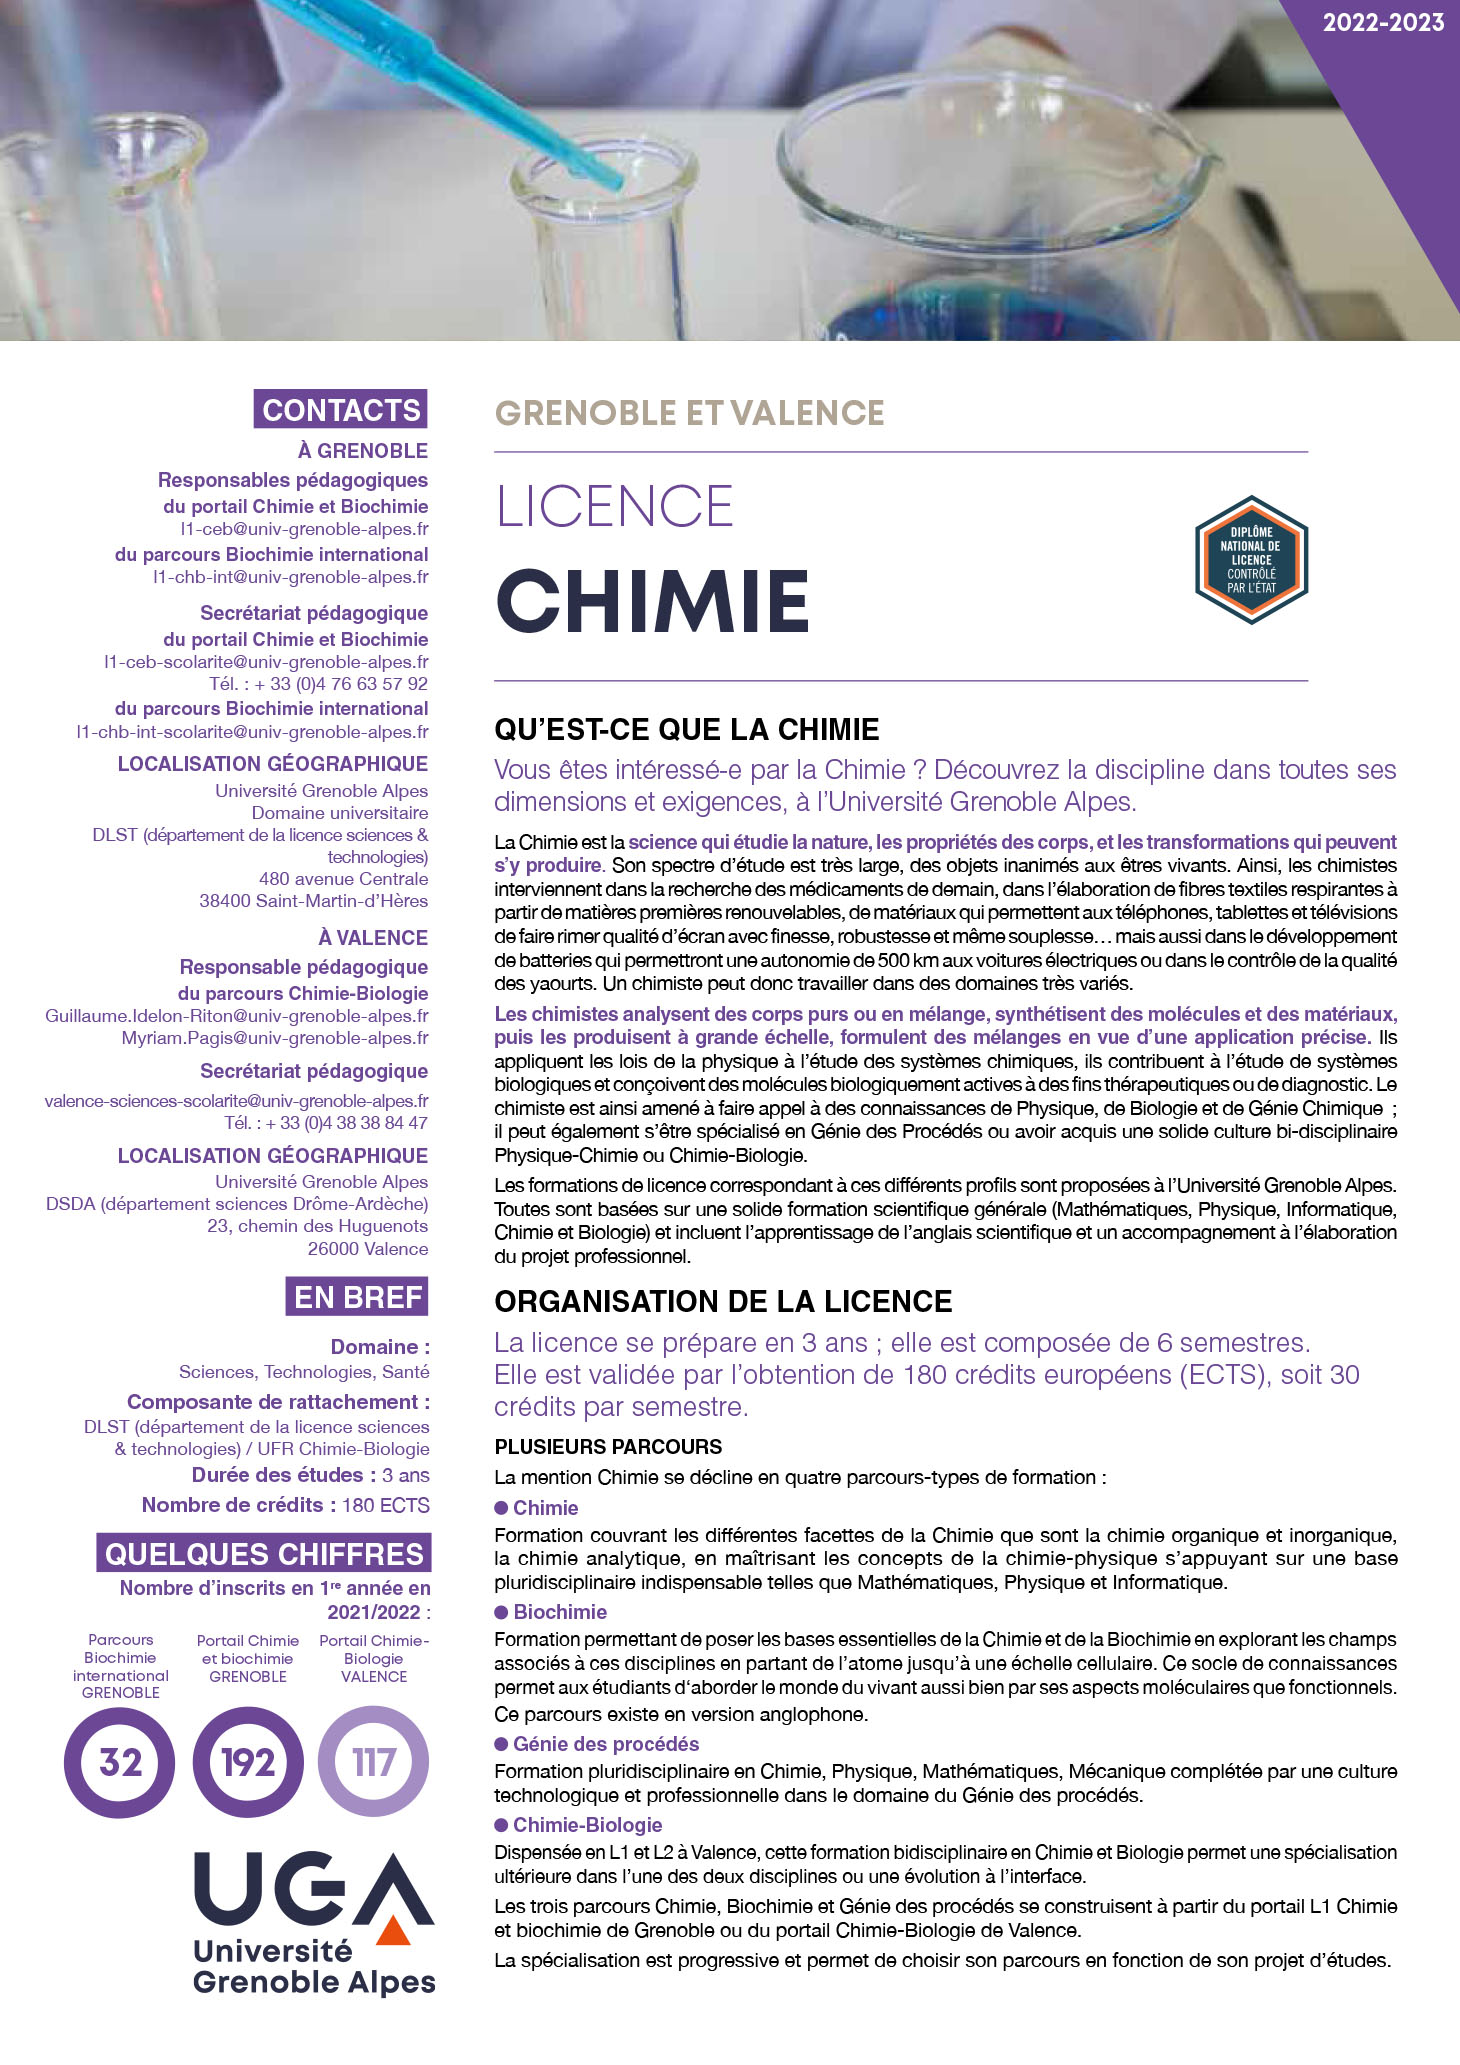 Licence chimie